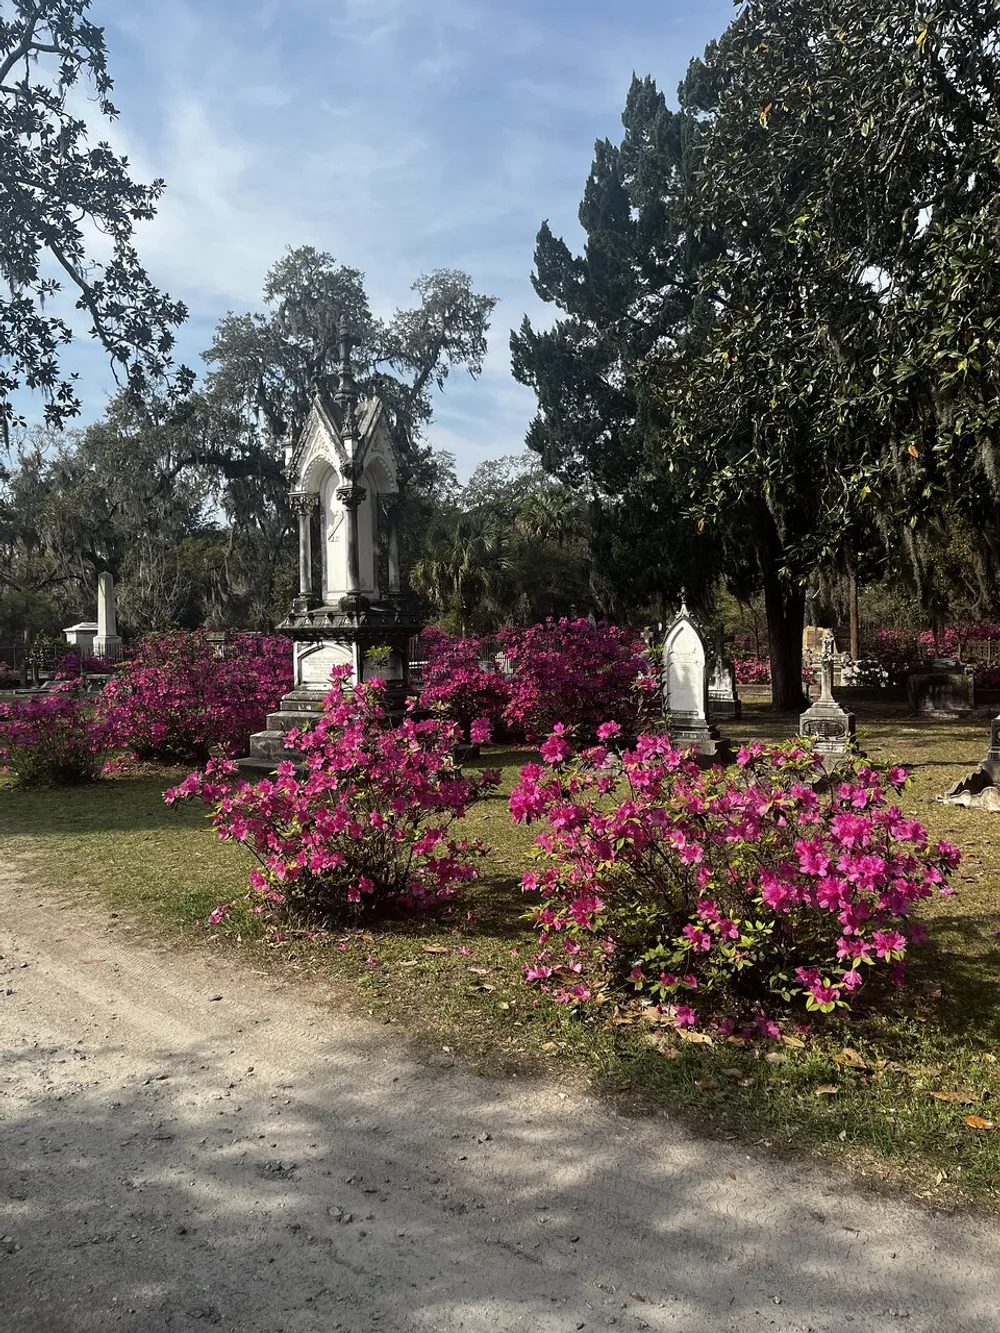 The image depicts a serene cemetery adorned with bright pink flowers and Spanish moss-draped trees under a clear sky